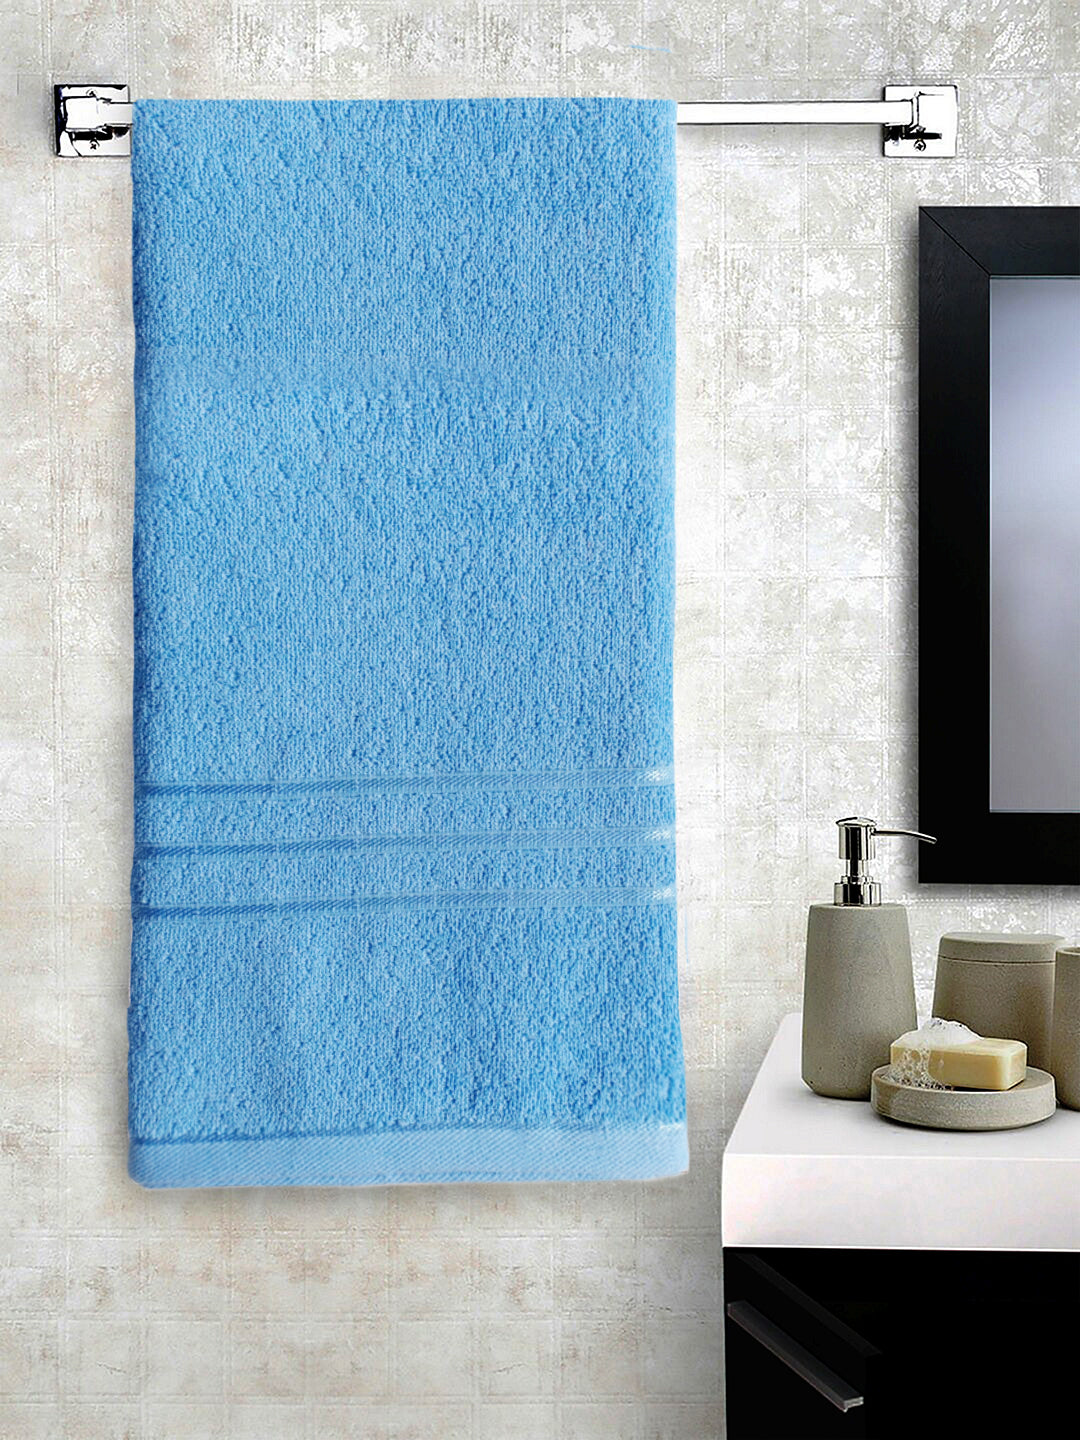 Blue Large Terry Bath Towel Ultra Soft Super Absorbent for Men Women Kids Cotton with Solid crepe by Lushomes 400 GSM  (27x57 inches, 70x147 cms, Single Piece)